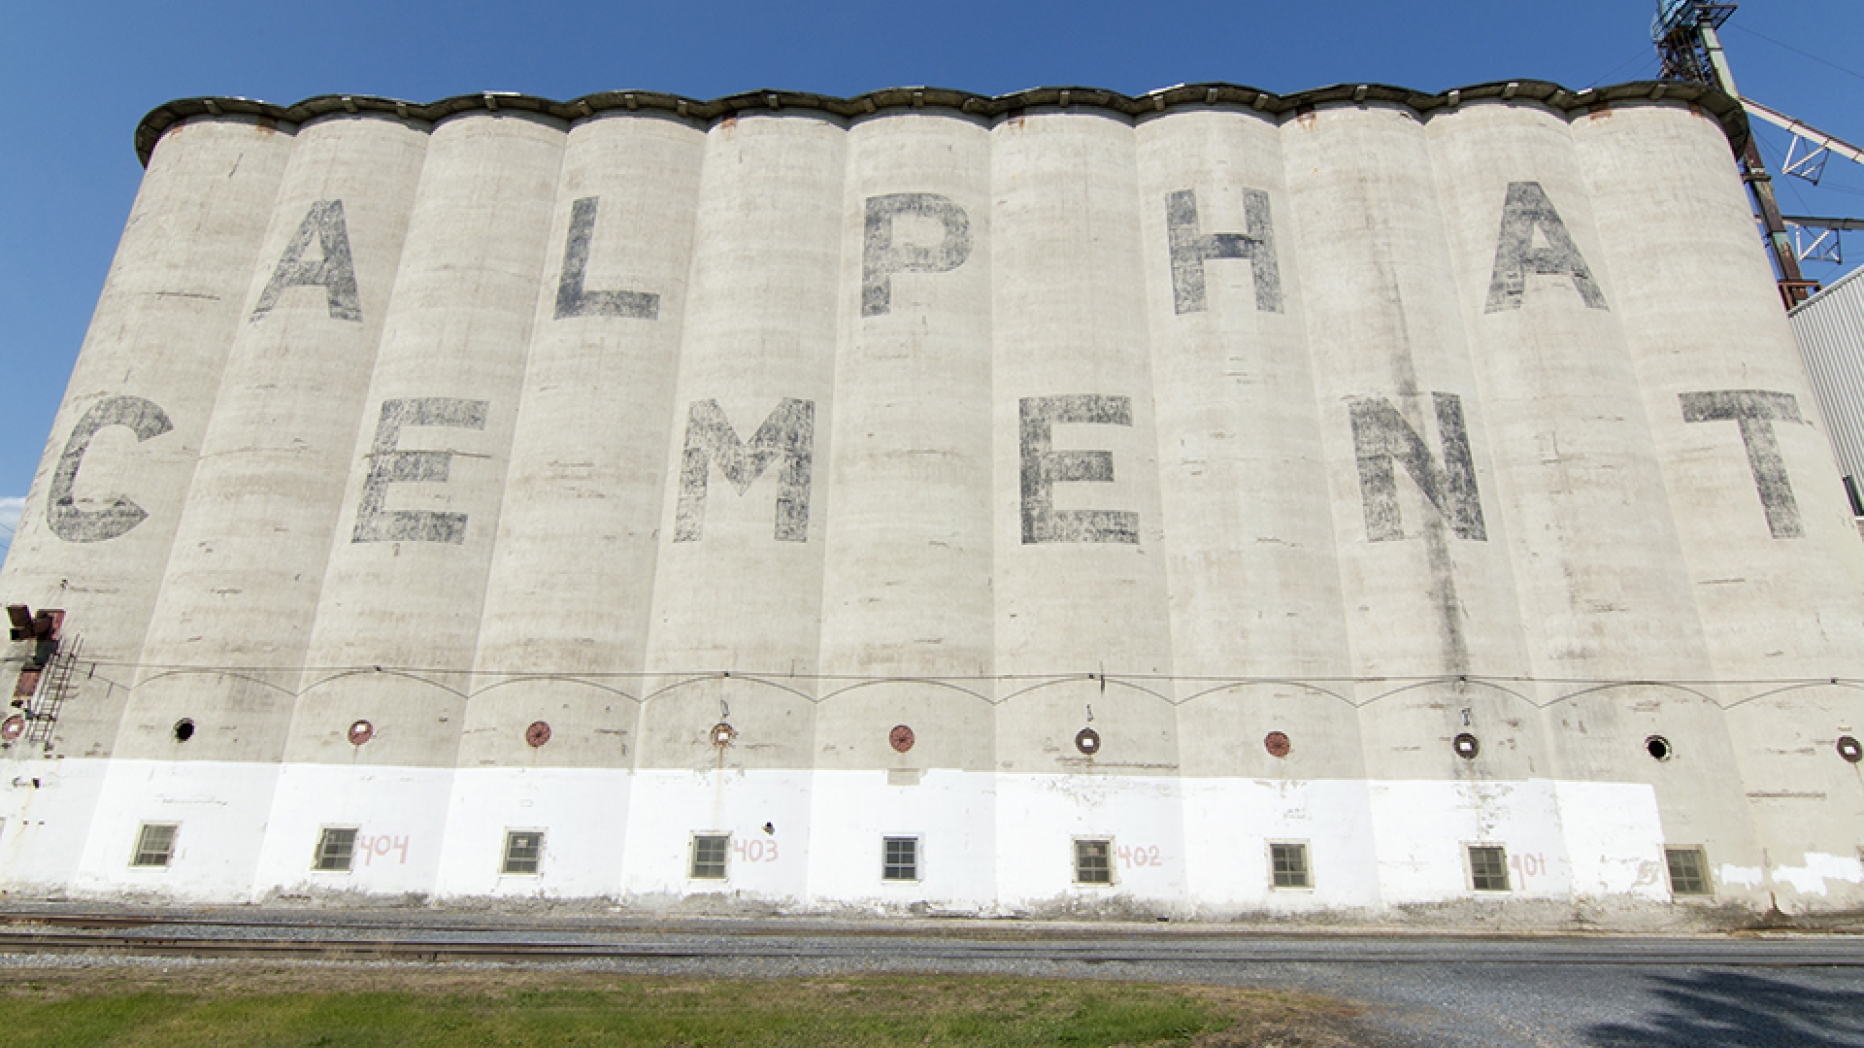 Cement silos with ALPHA CEMENT painted on the side.